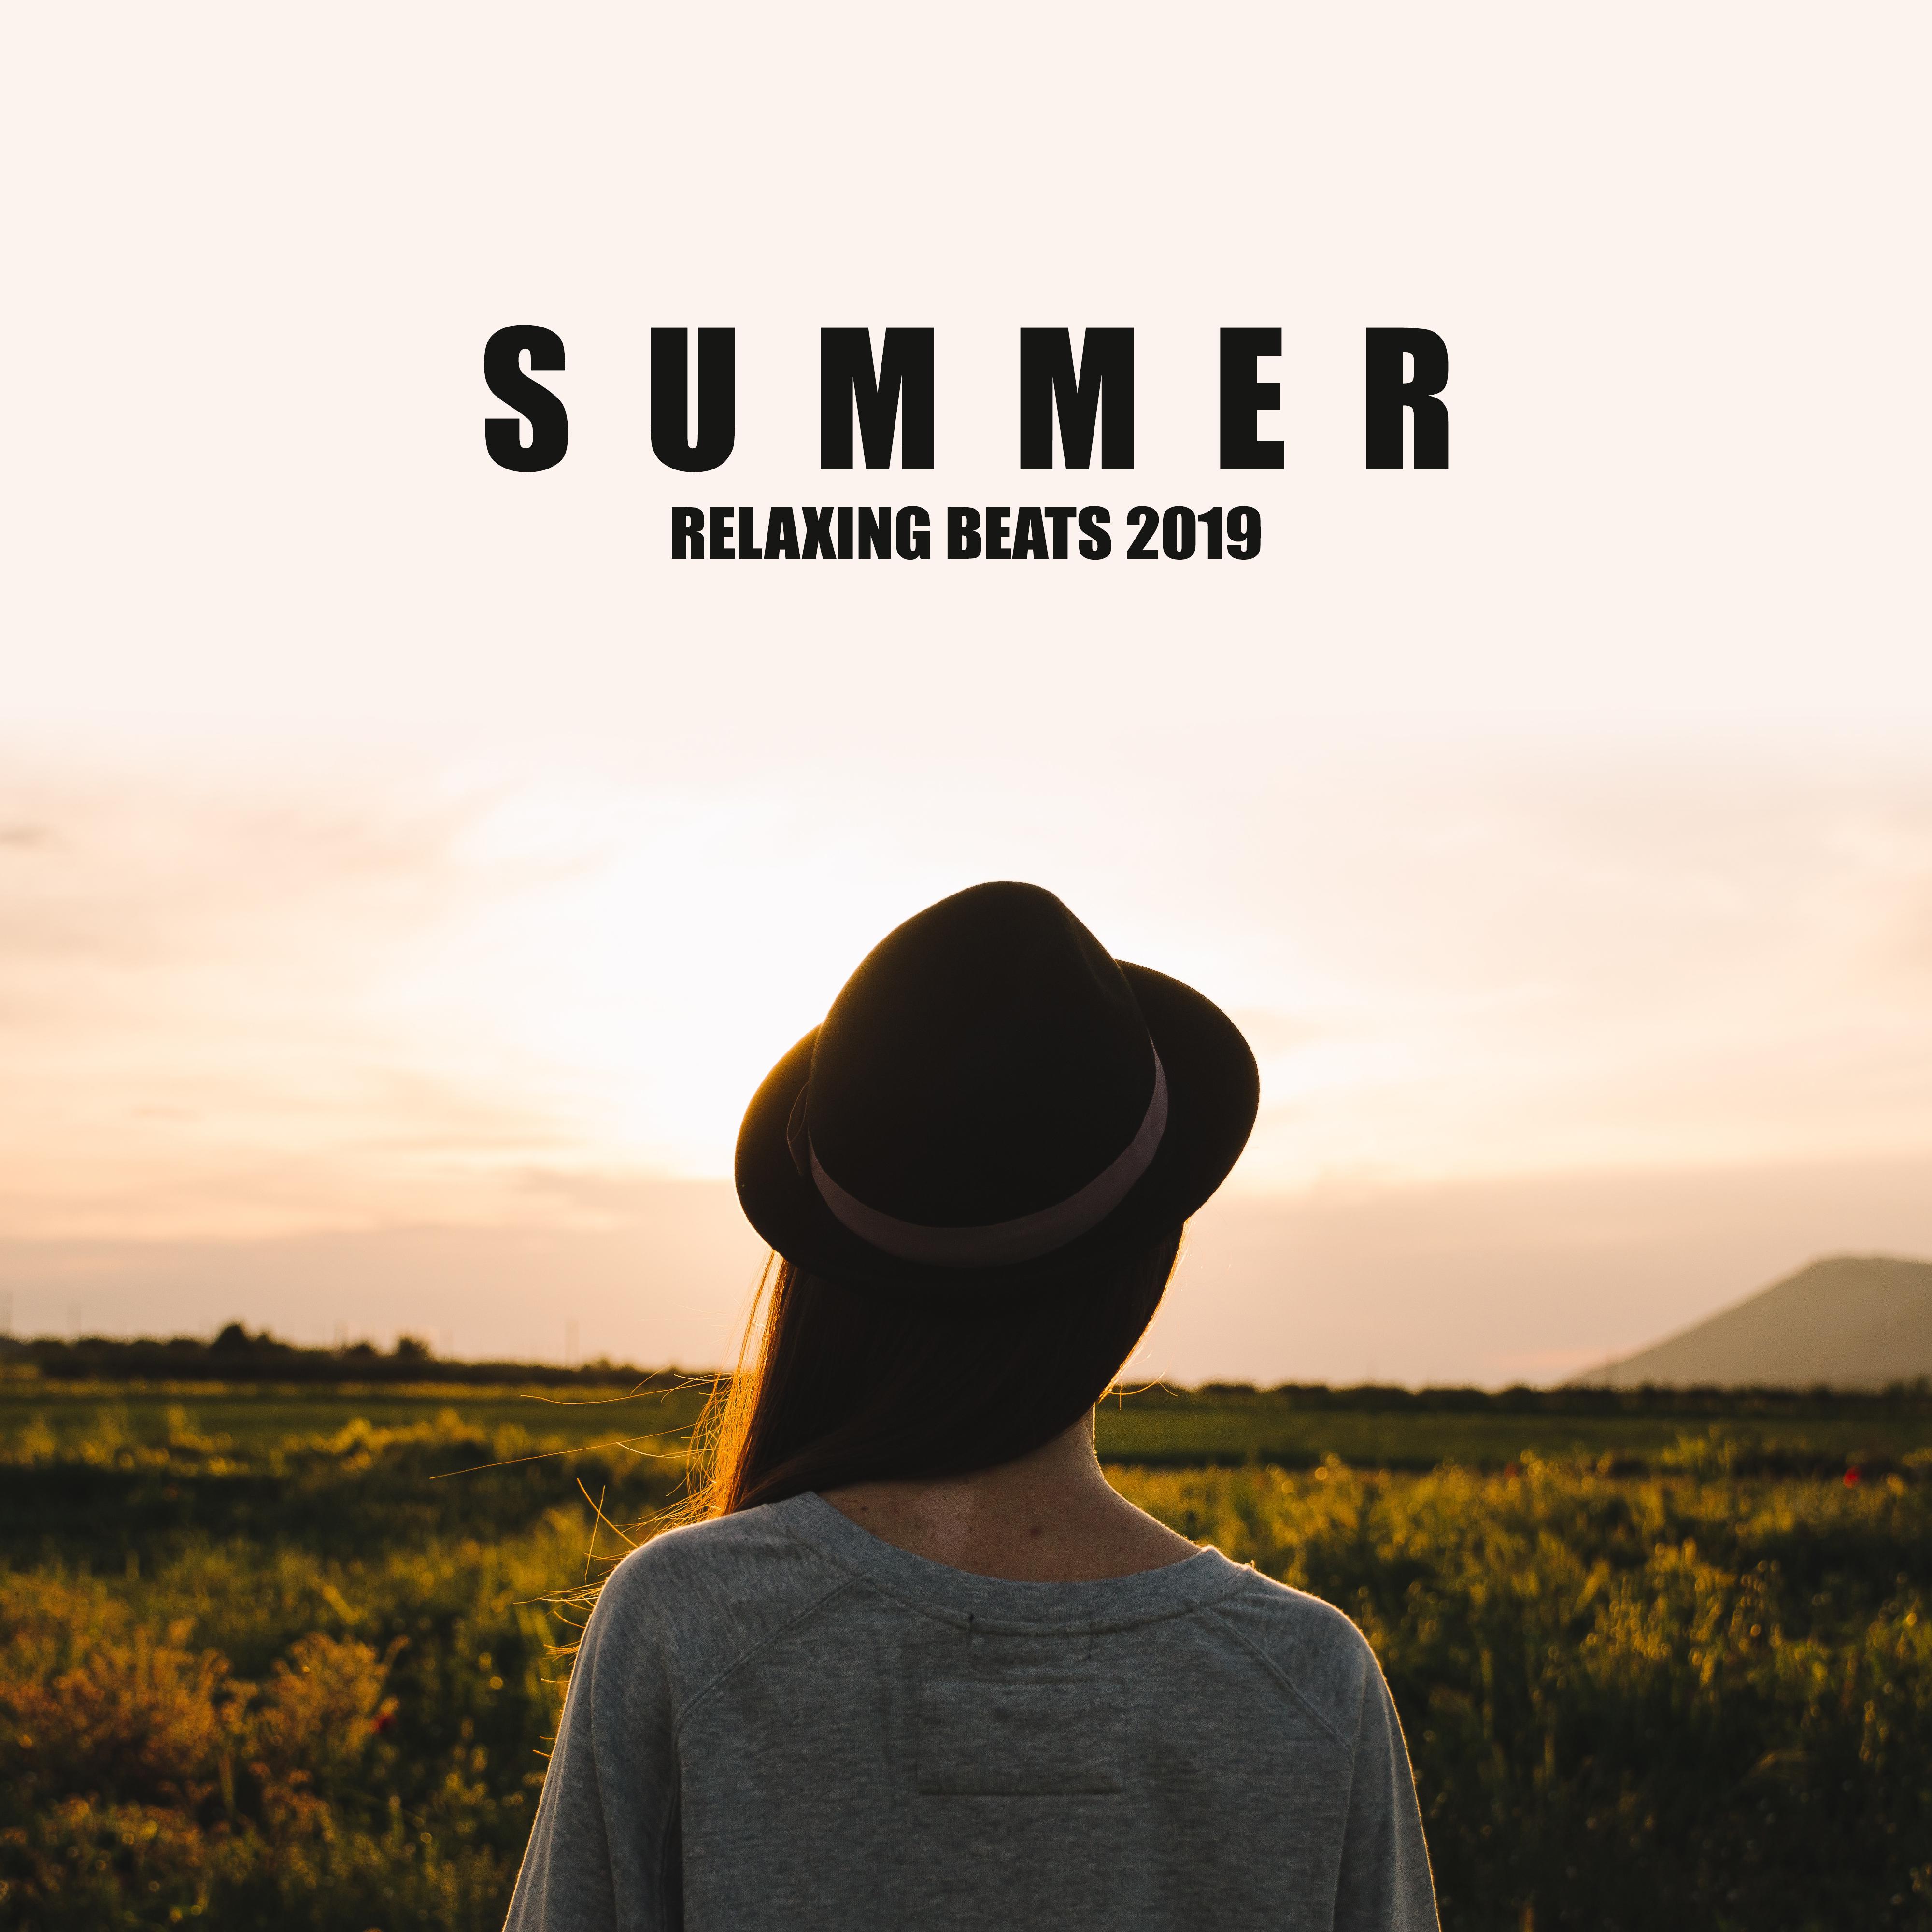 Summer Relaxing Beats 2019 – Compilation of Best Chillout Holiday Tracks for Beach Relaxation & After Party Rest at Home